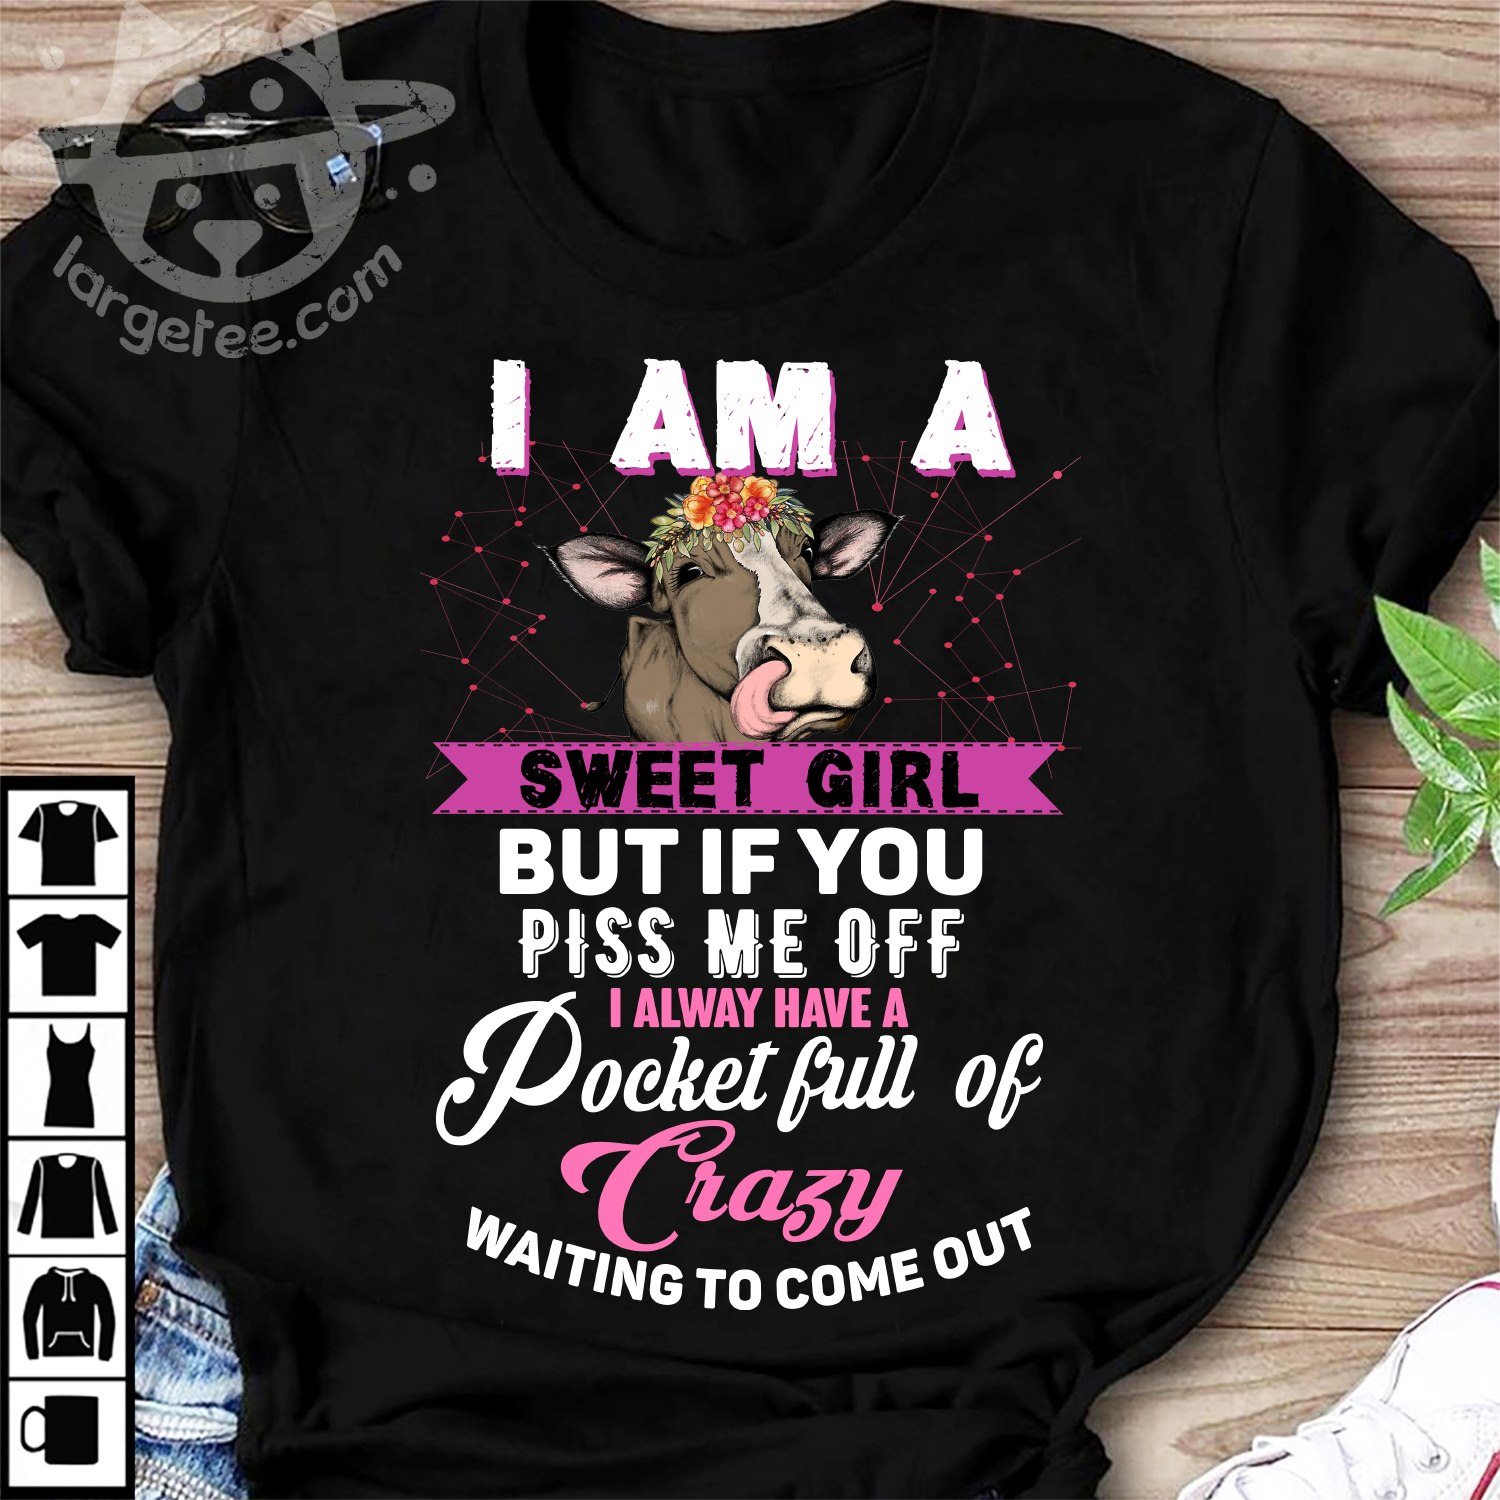 I am a sweet girl but if you piss me off I alway have a pocket full of crazy - Cows